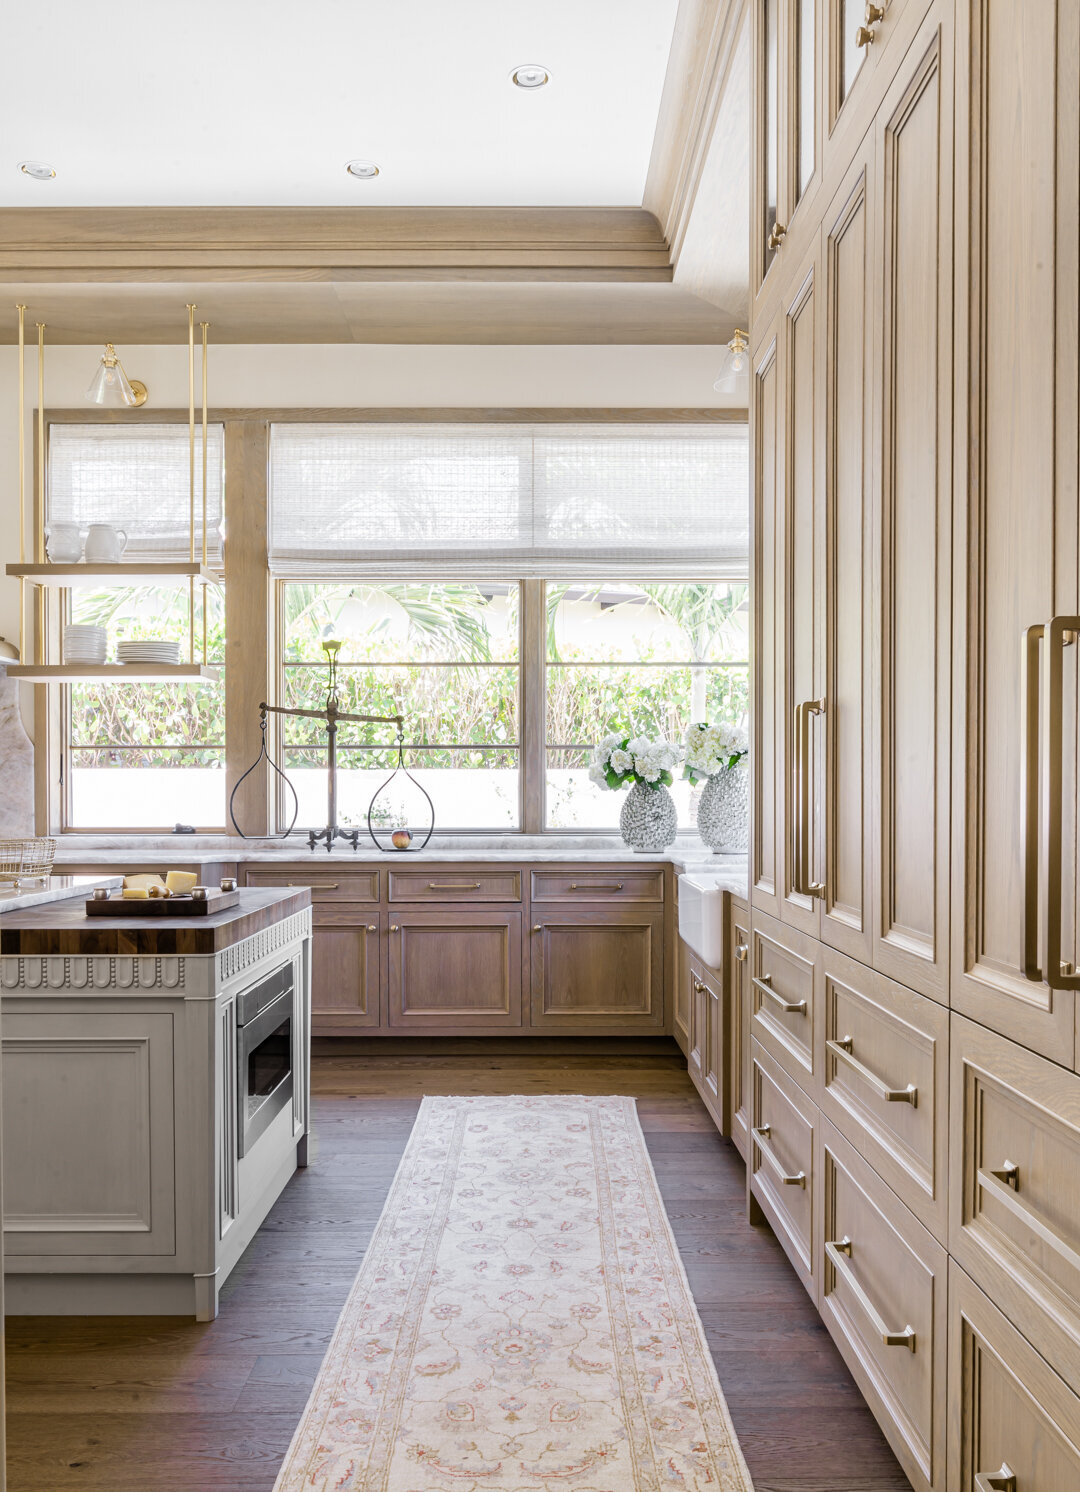 Cabinetry and windows